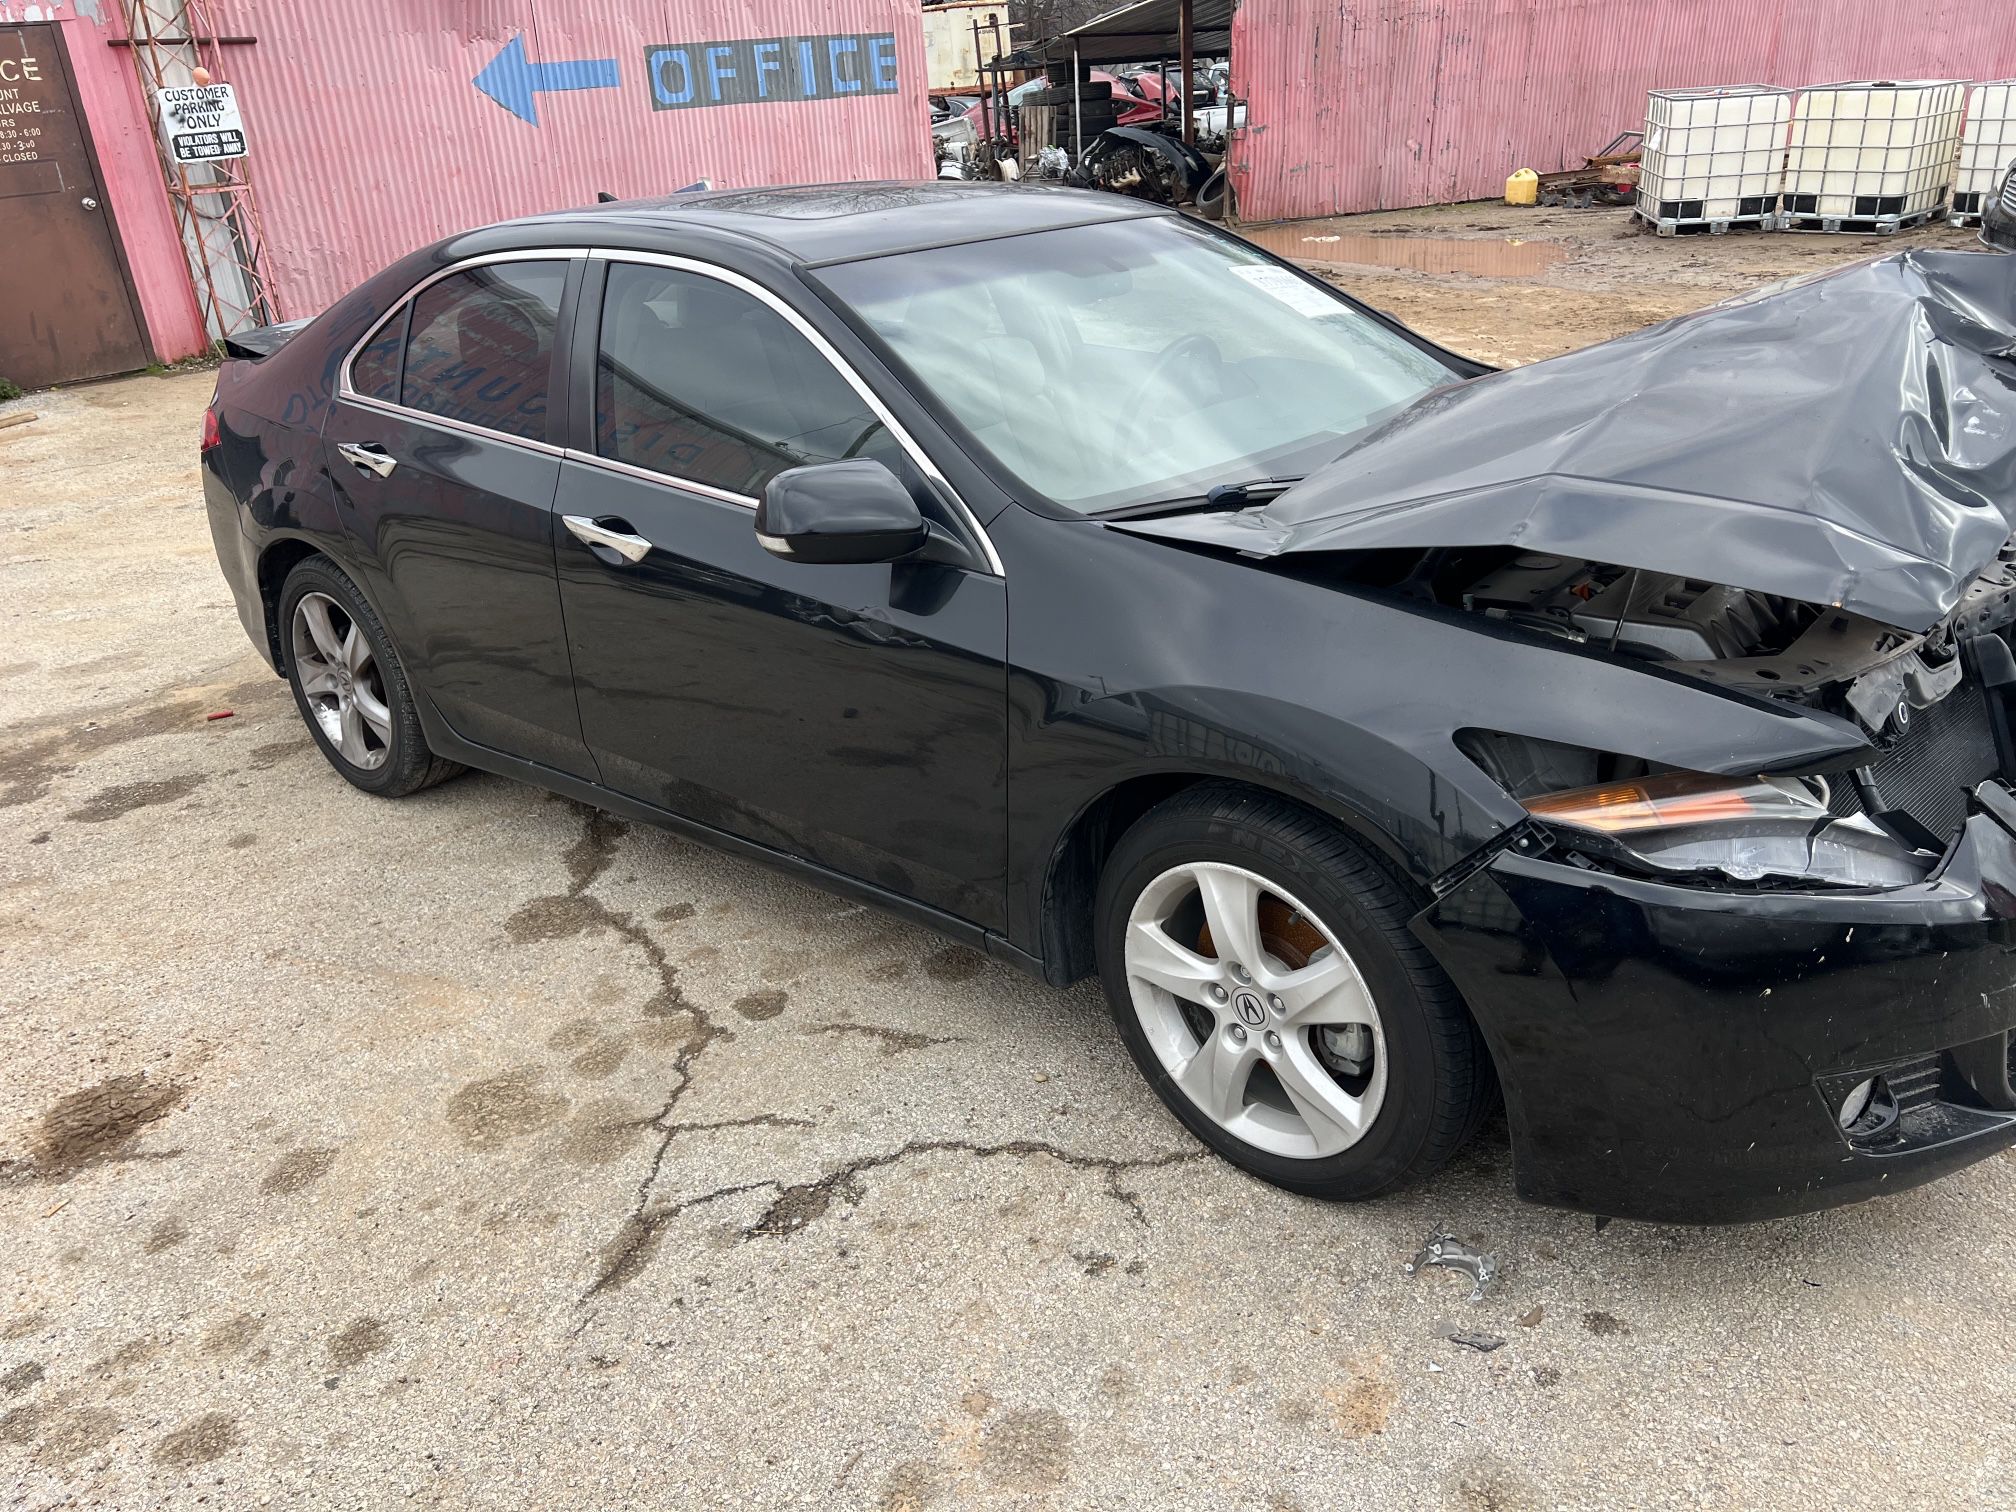 2010 Acura TSX - Parts Only #AB6